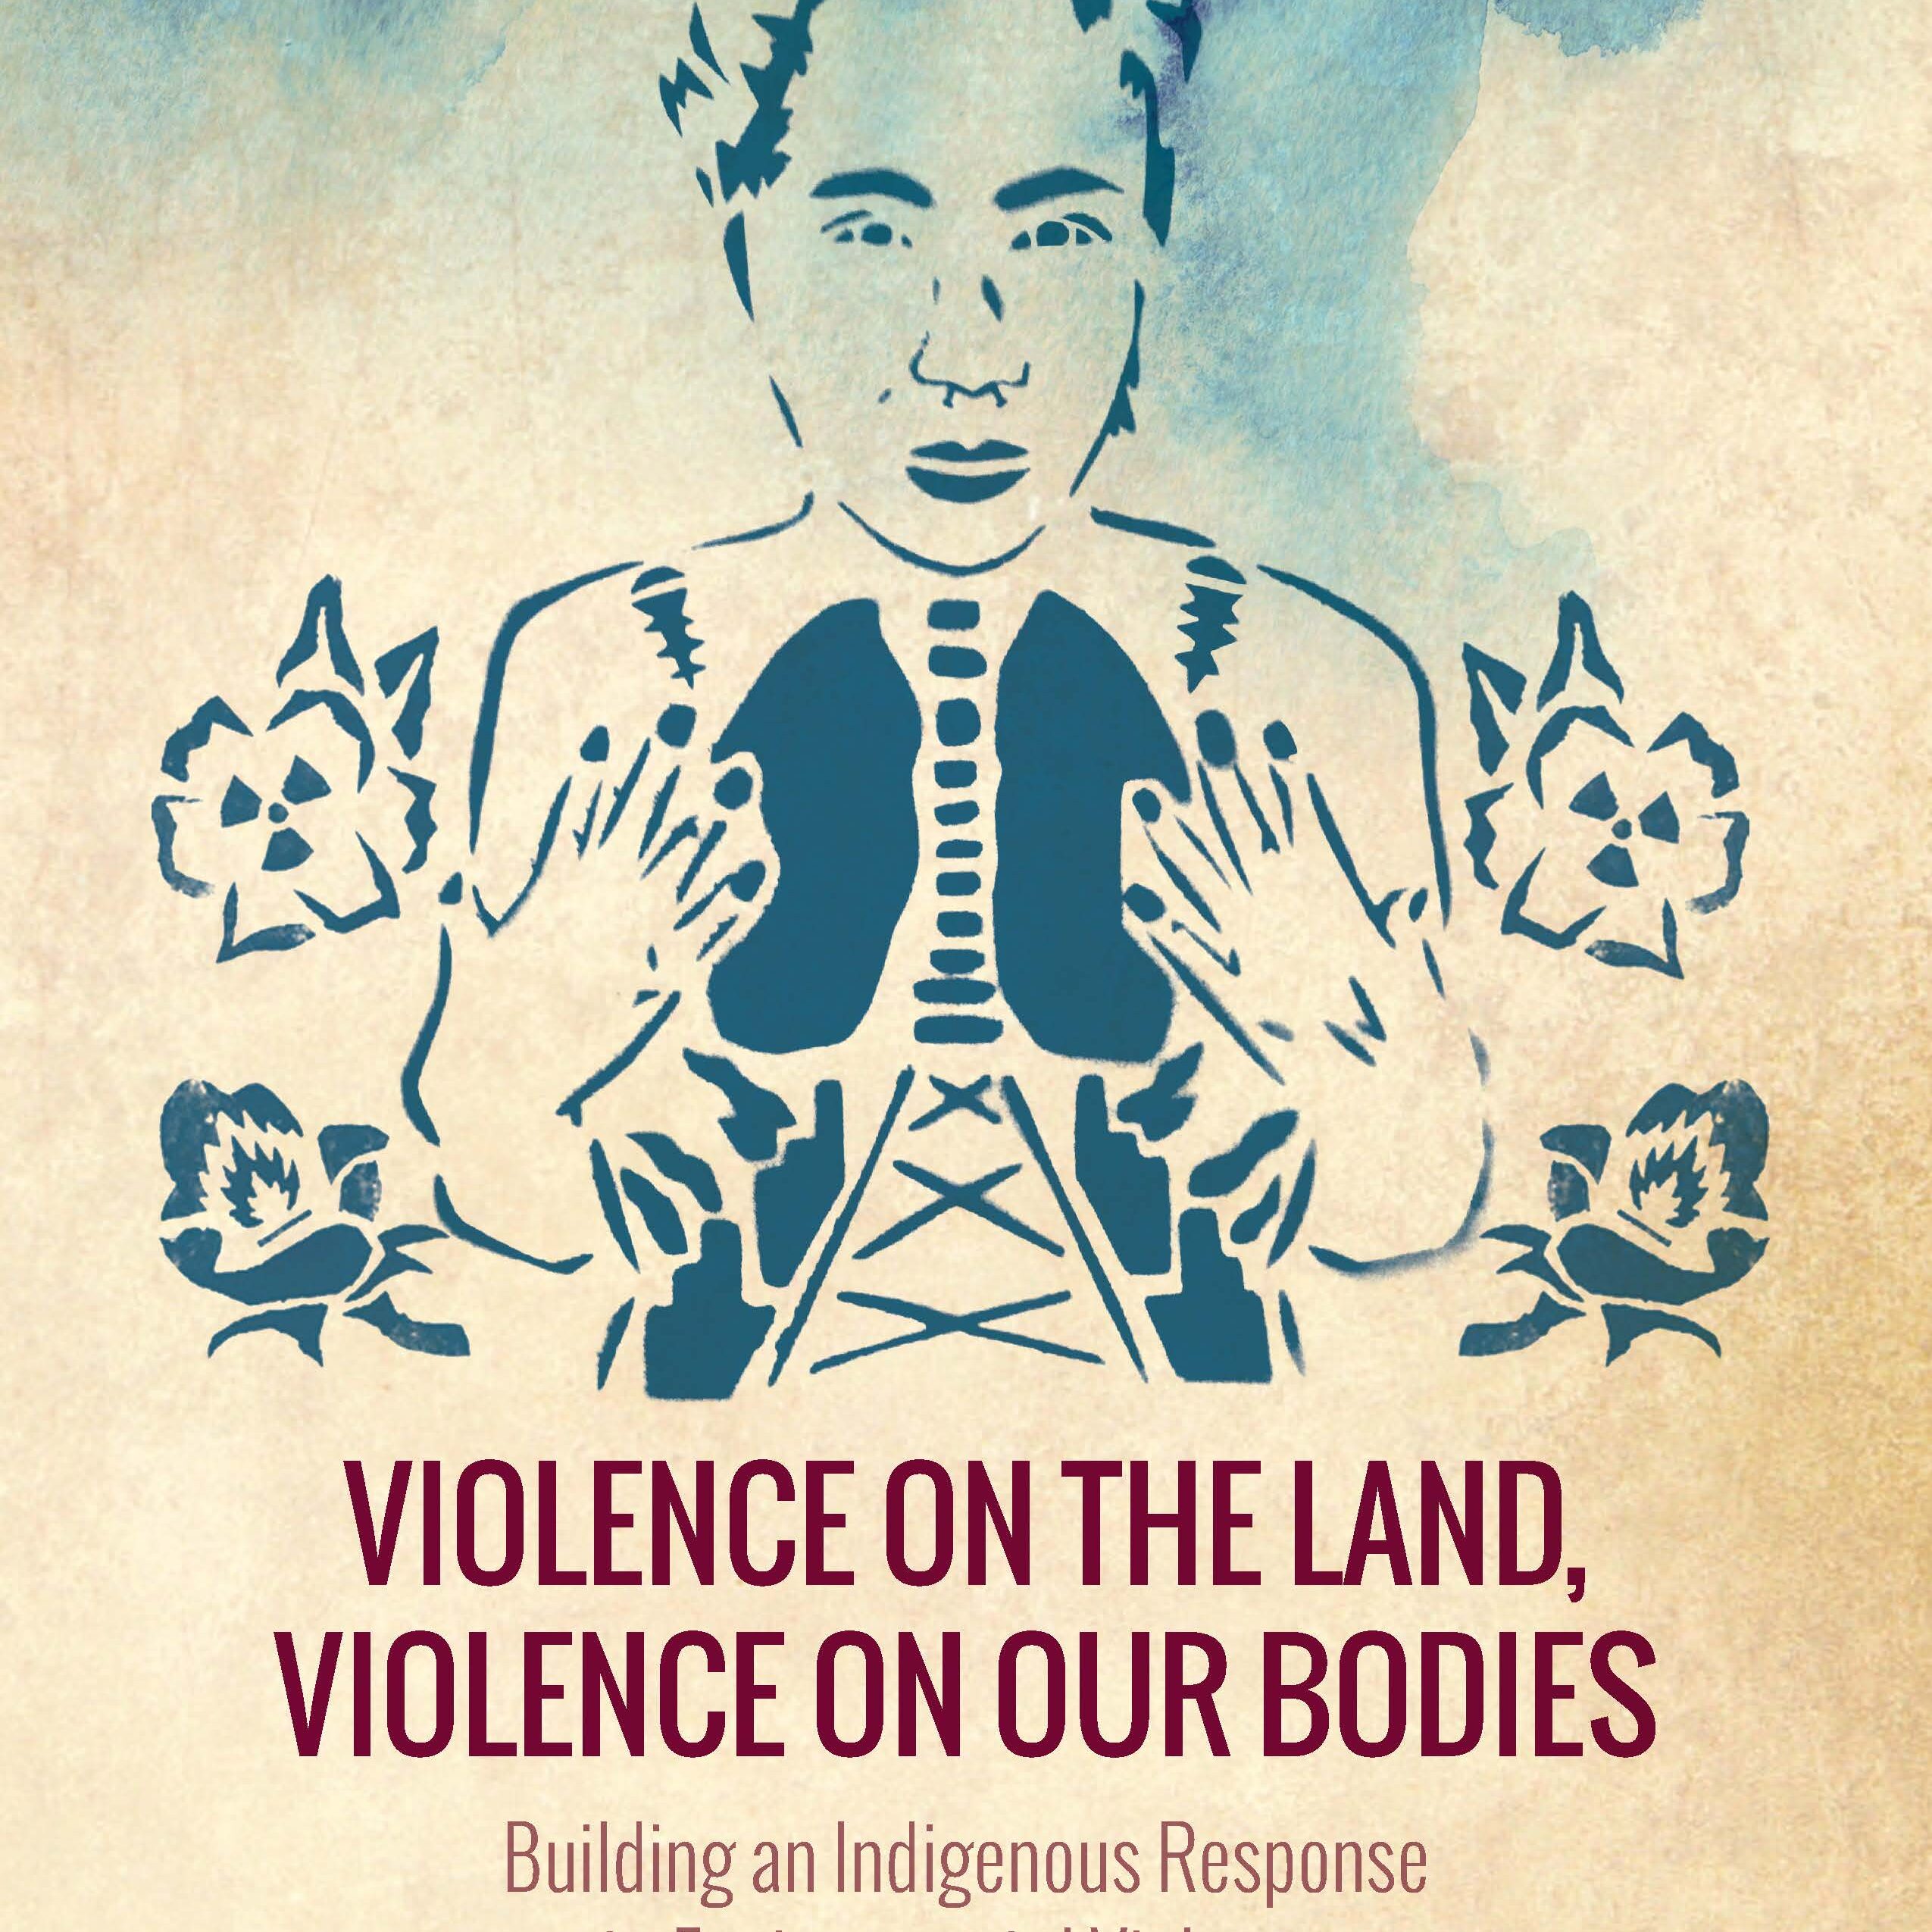 Environmental Violence Report and Toolkit